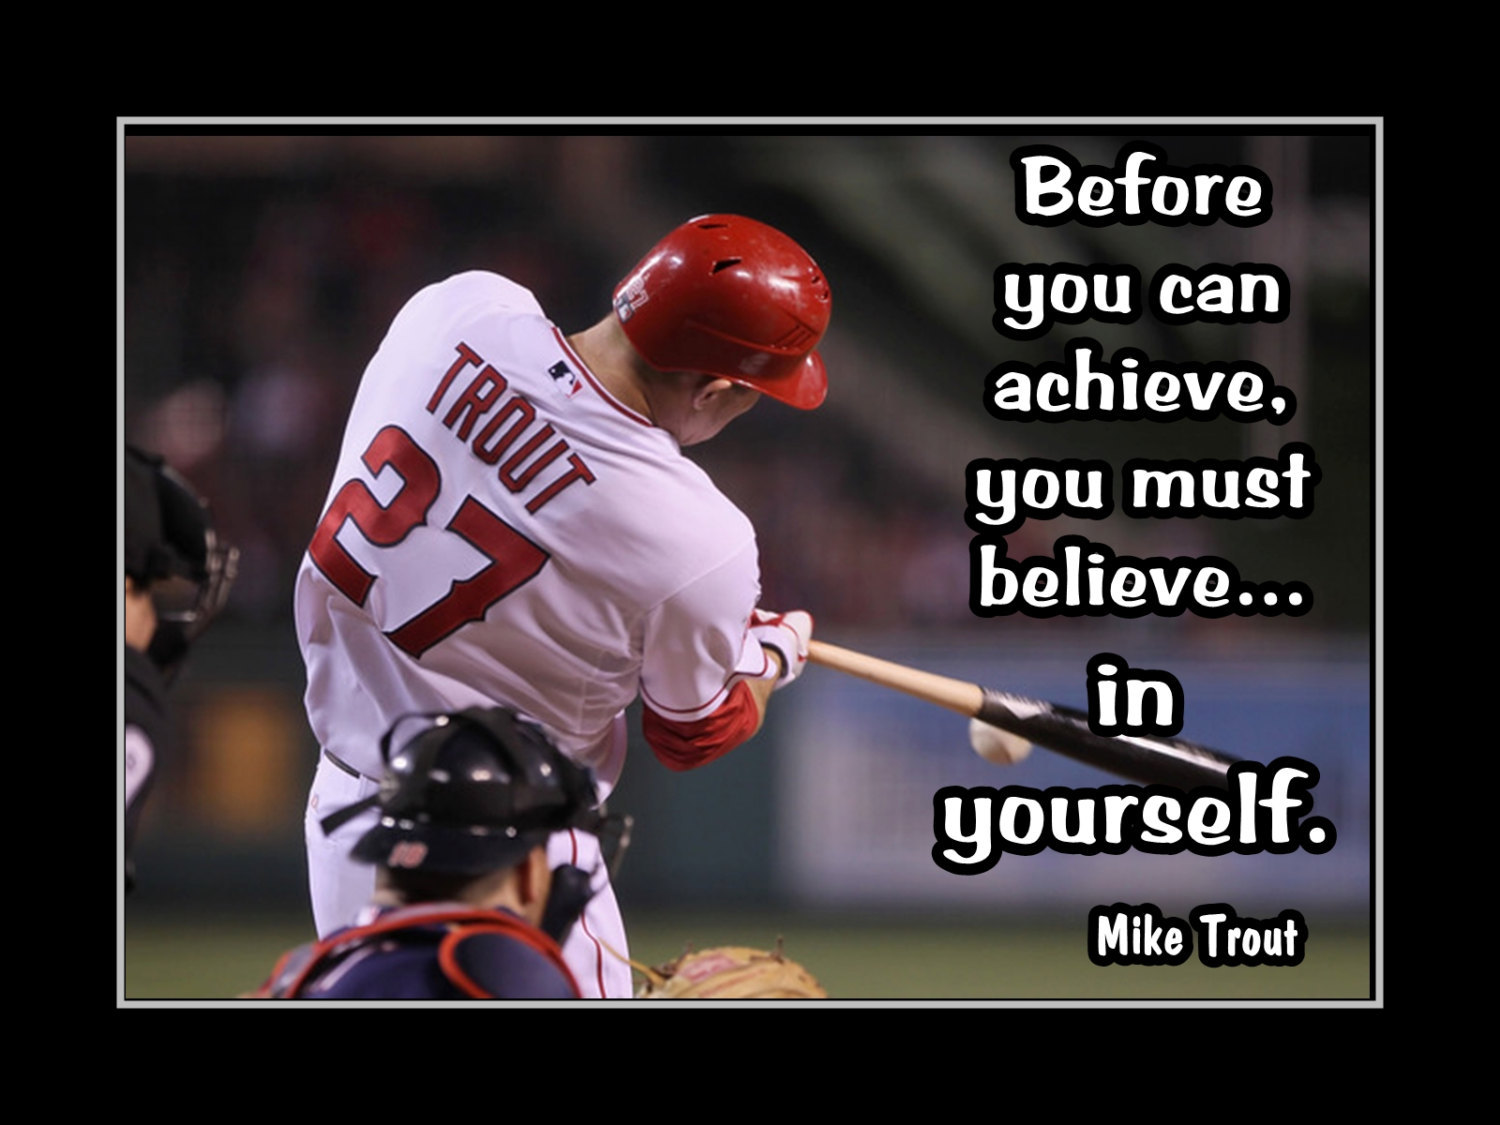 Inspirational Mike Trout Baseball Motivation Quote Poster Print Gift Wall Art - $22.99 - $39.99